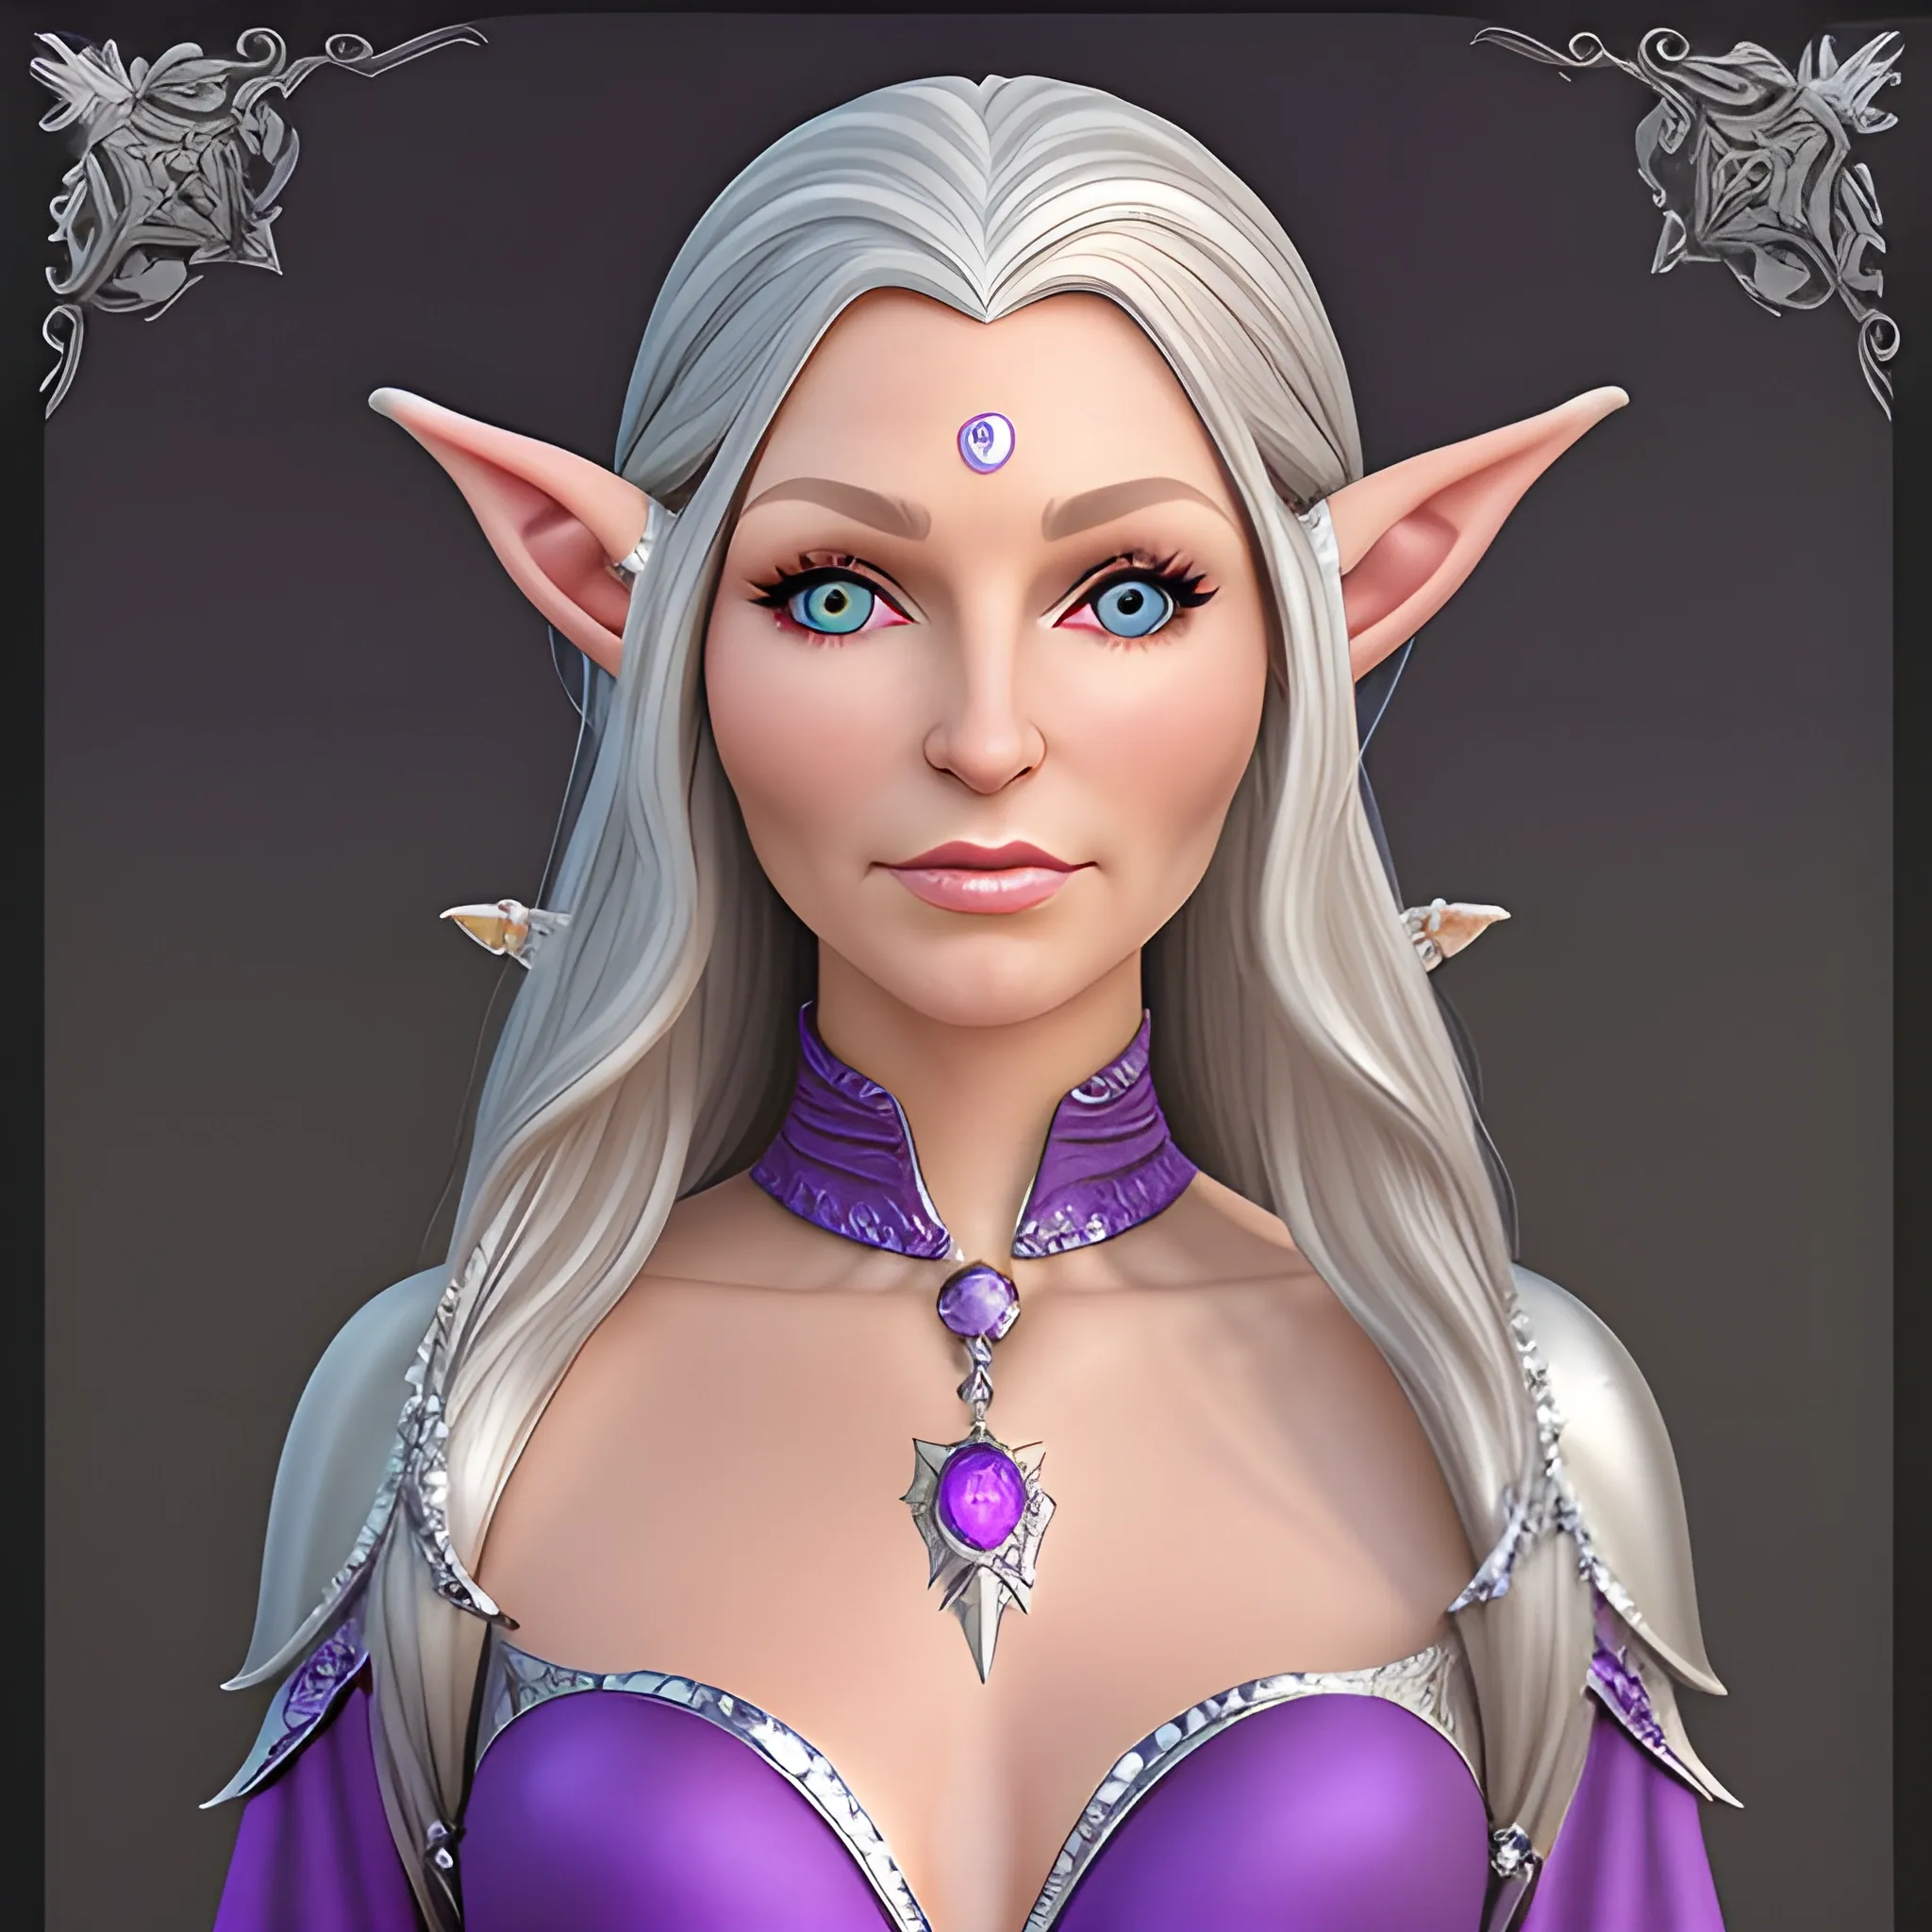 realistic slightly older female elf with long curling silver hair and purple eyes. Jeweled ears and body. Dewy skin, soft features queenly